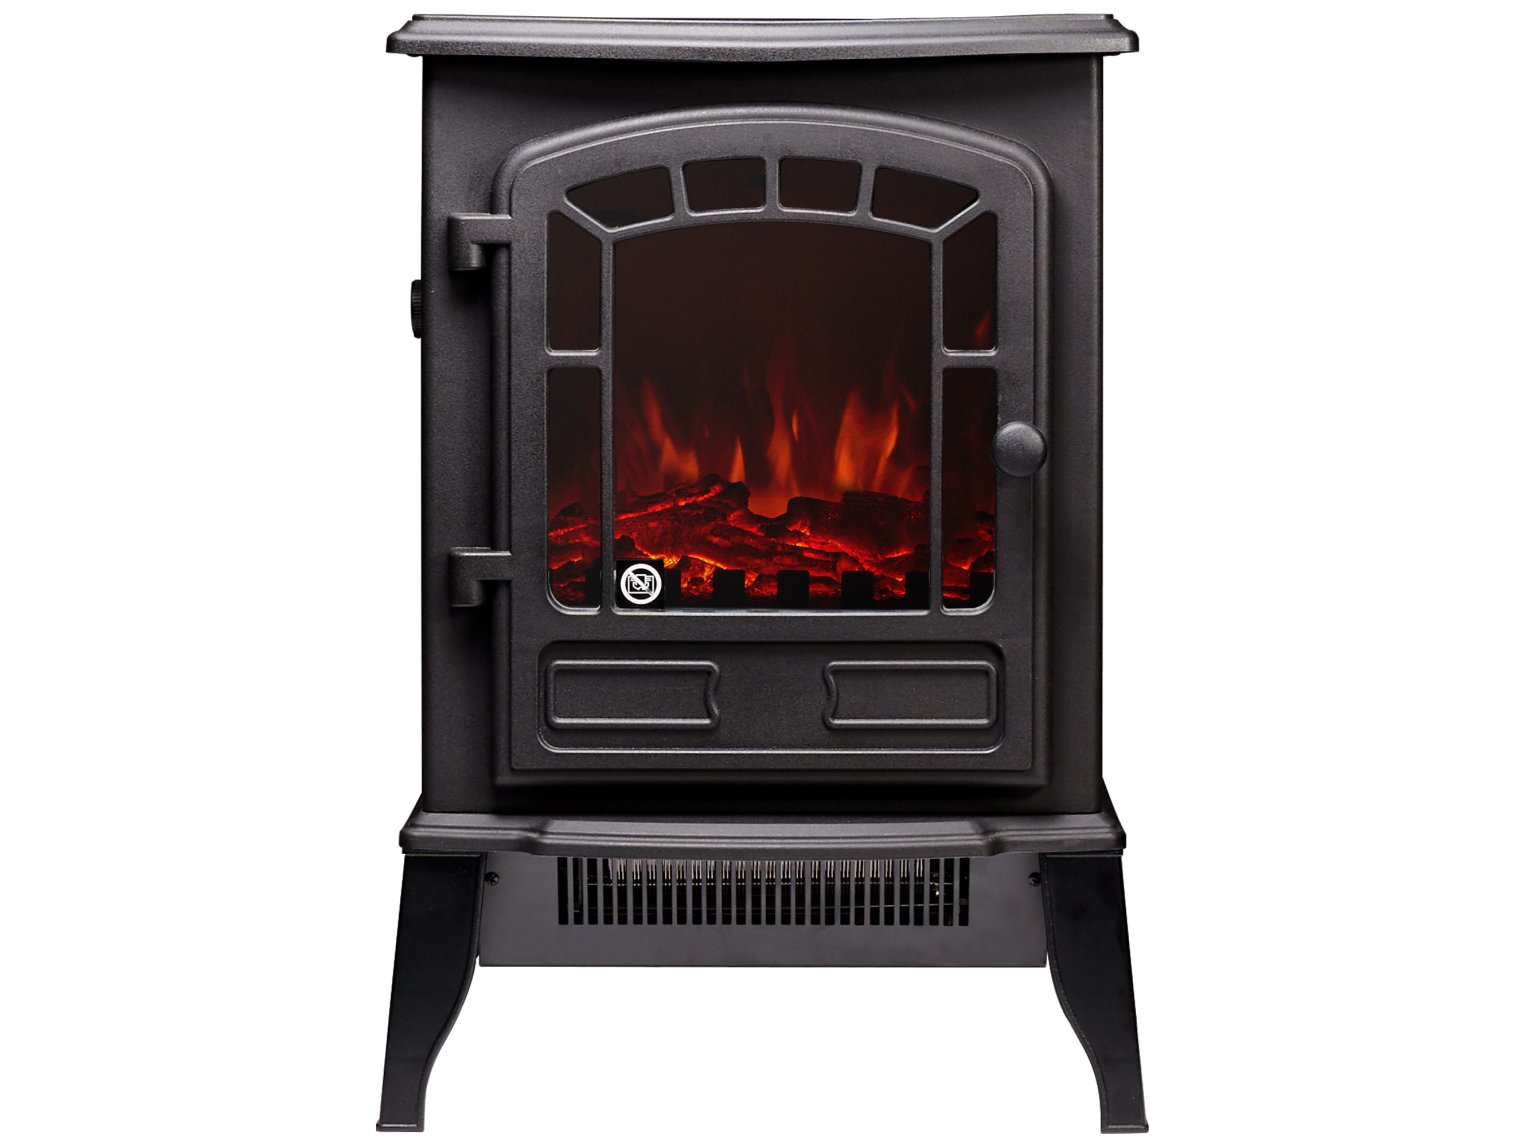 The Ripon Electric Stove in Black